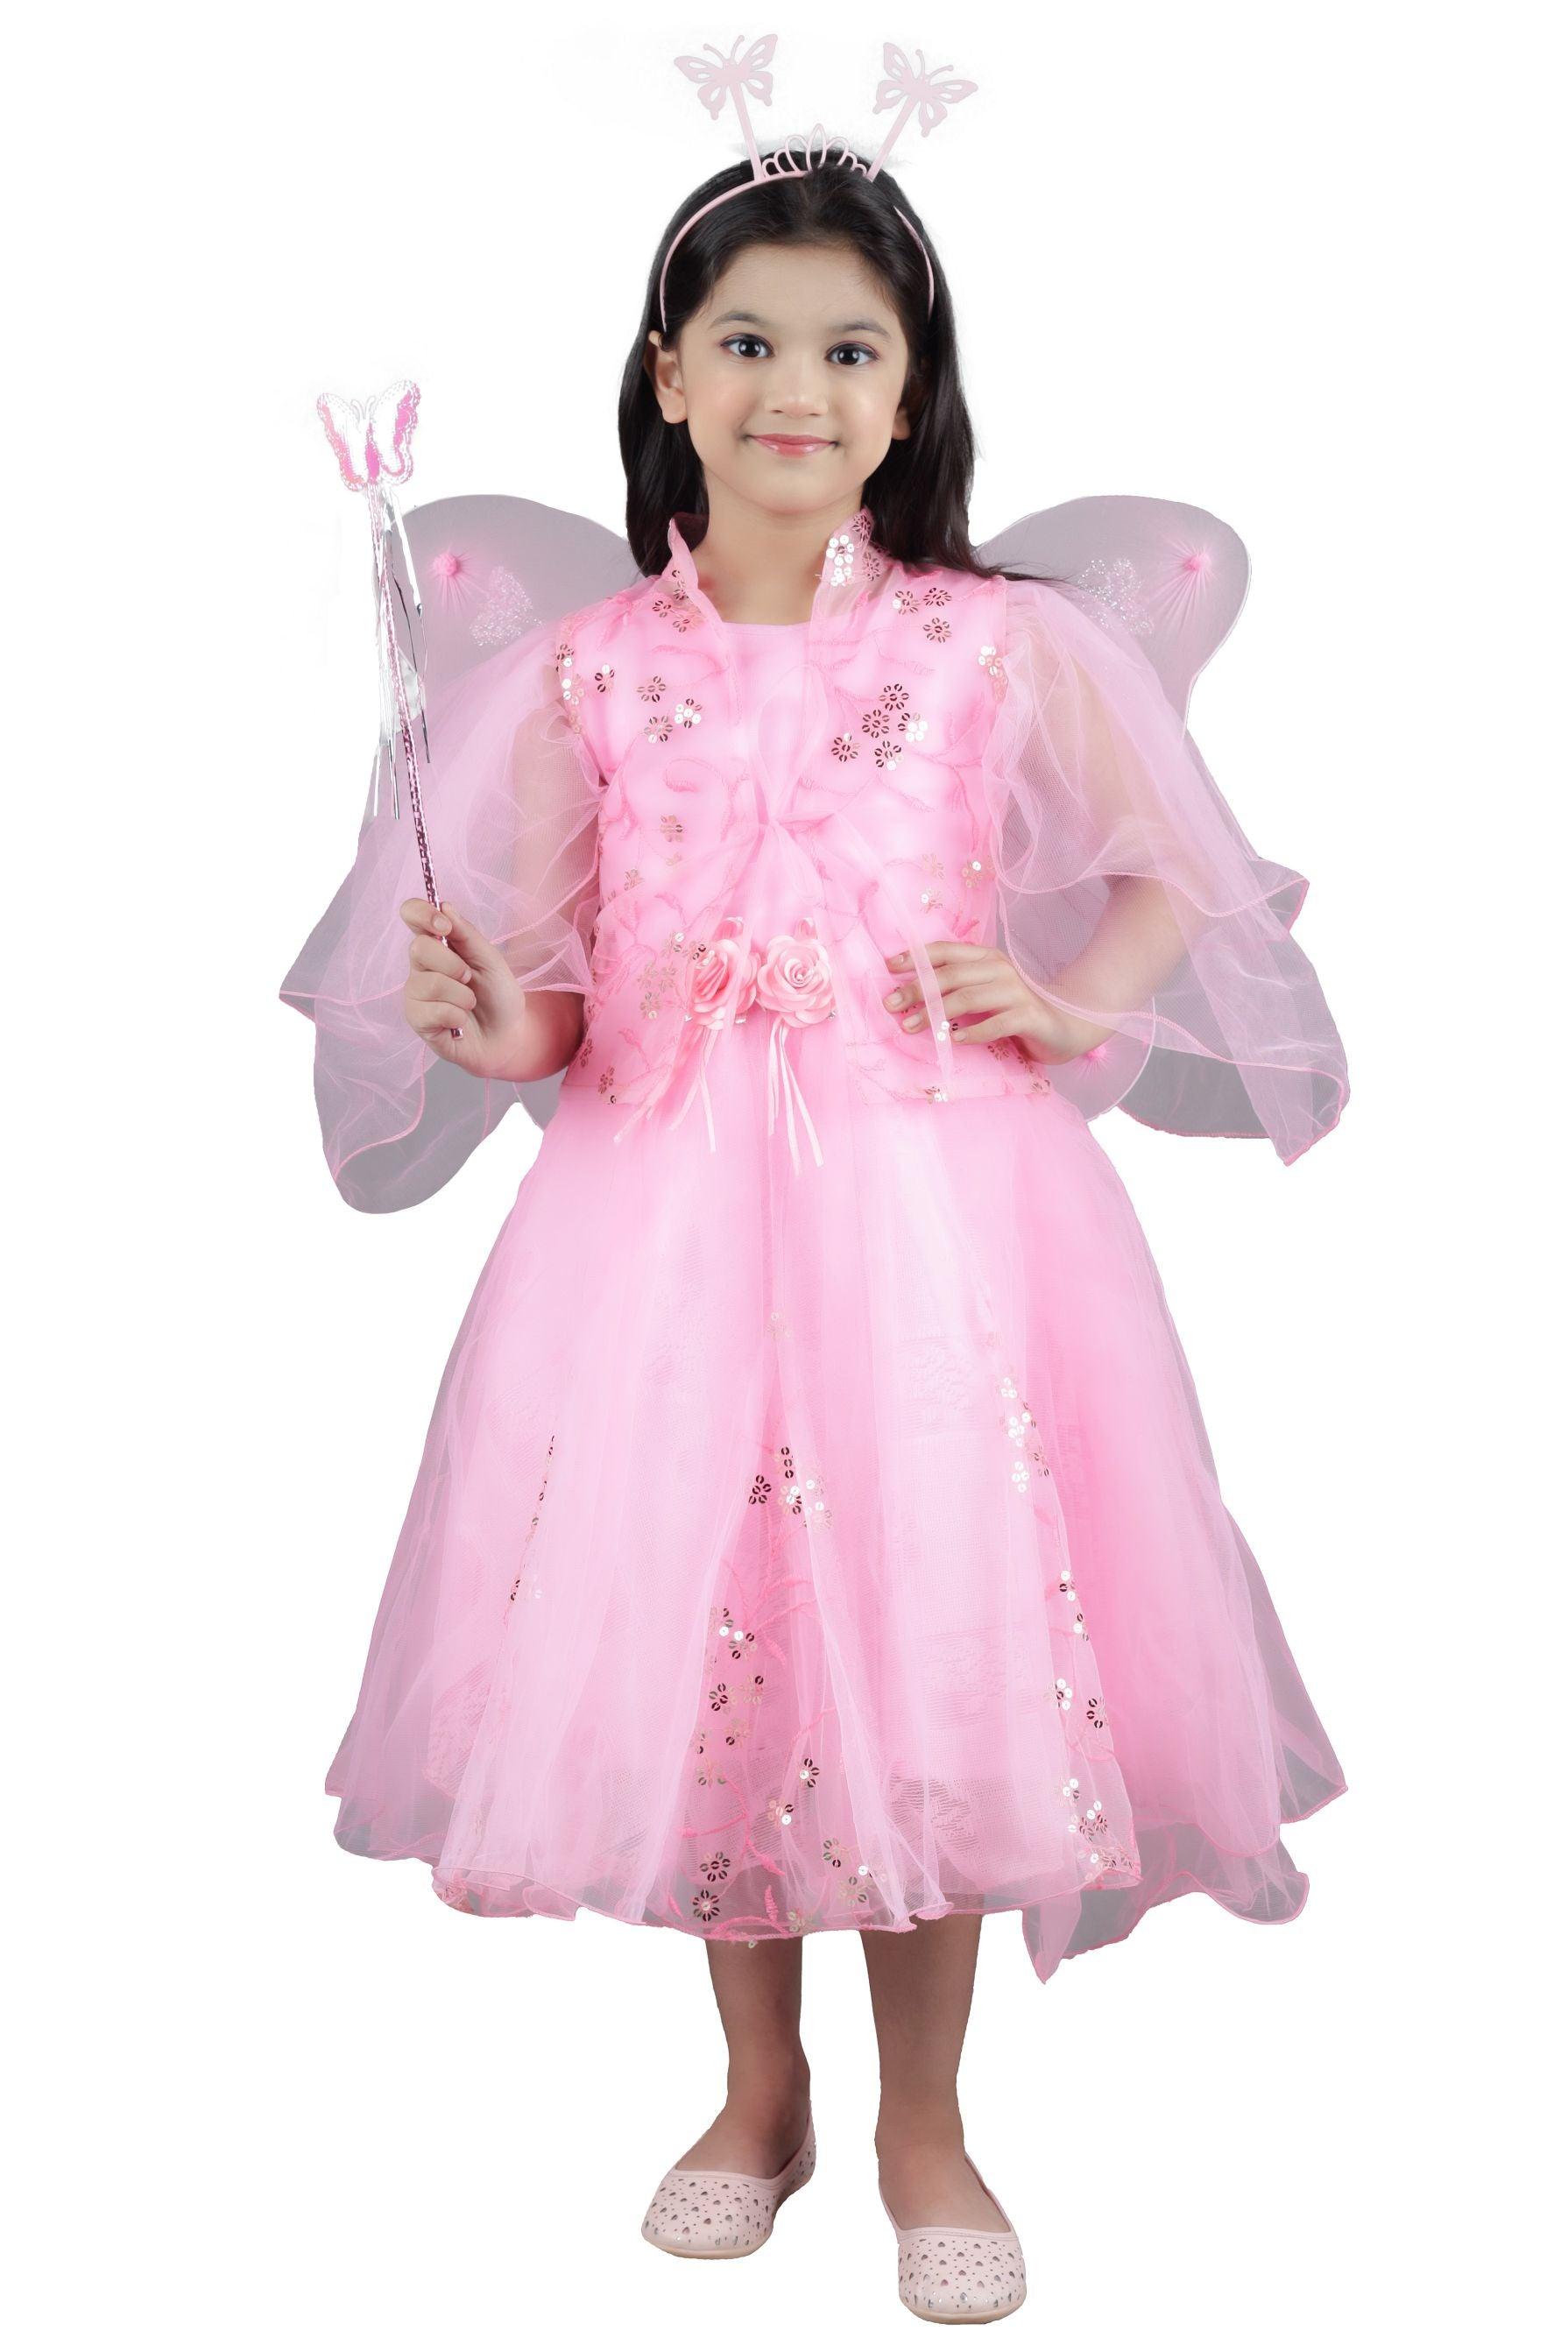 Girls Net Frock Angel Pari Dress|Party/Festive Designer Fairy Frock (6-9  Months, Pink) : Amazon.in: Clothing & Accessories